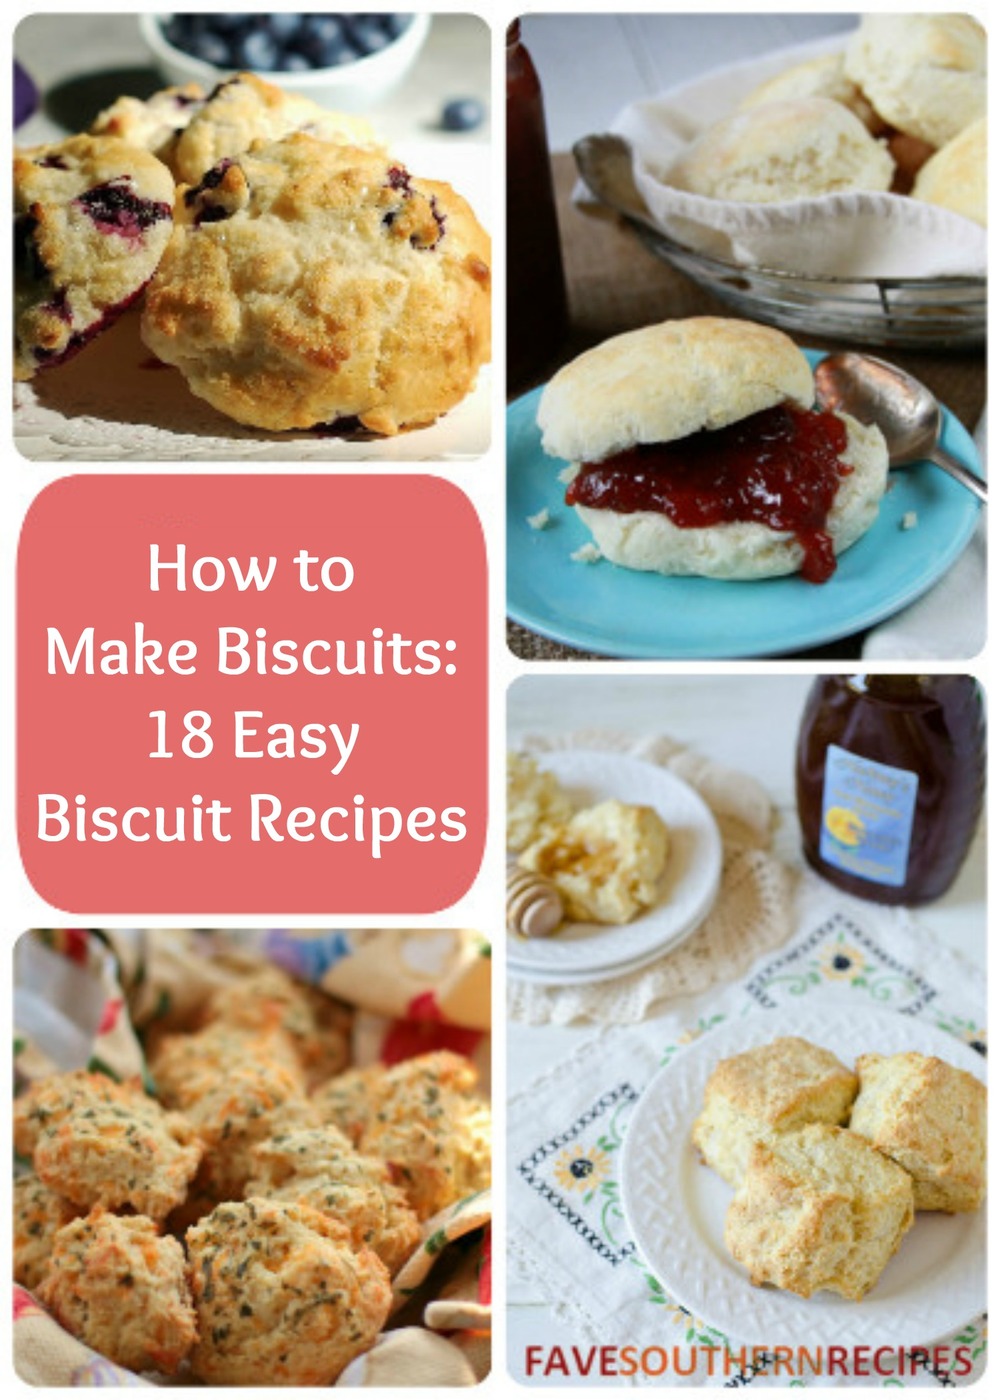 How to Make Biscuits: 18 Easy Biscuit Recipes ...